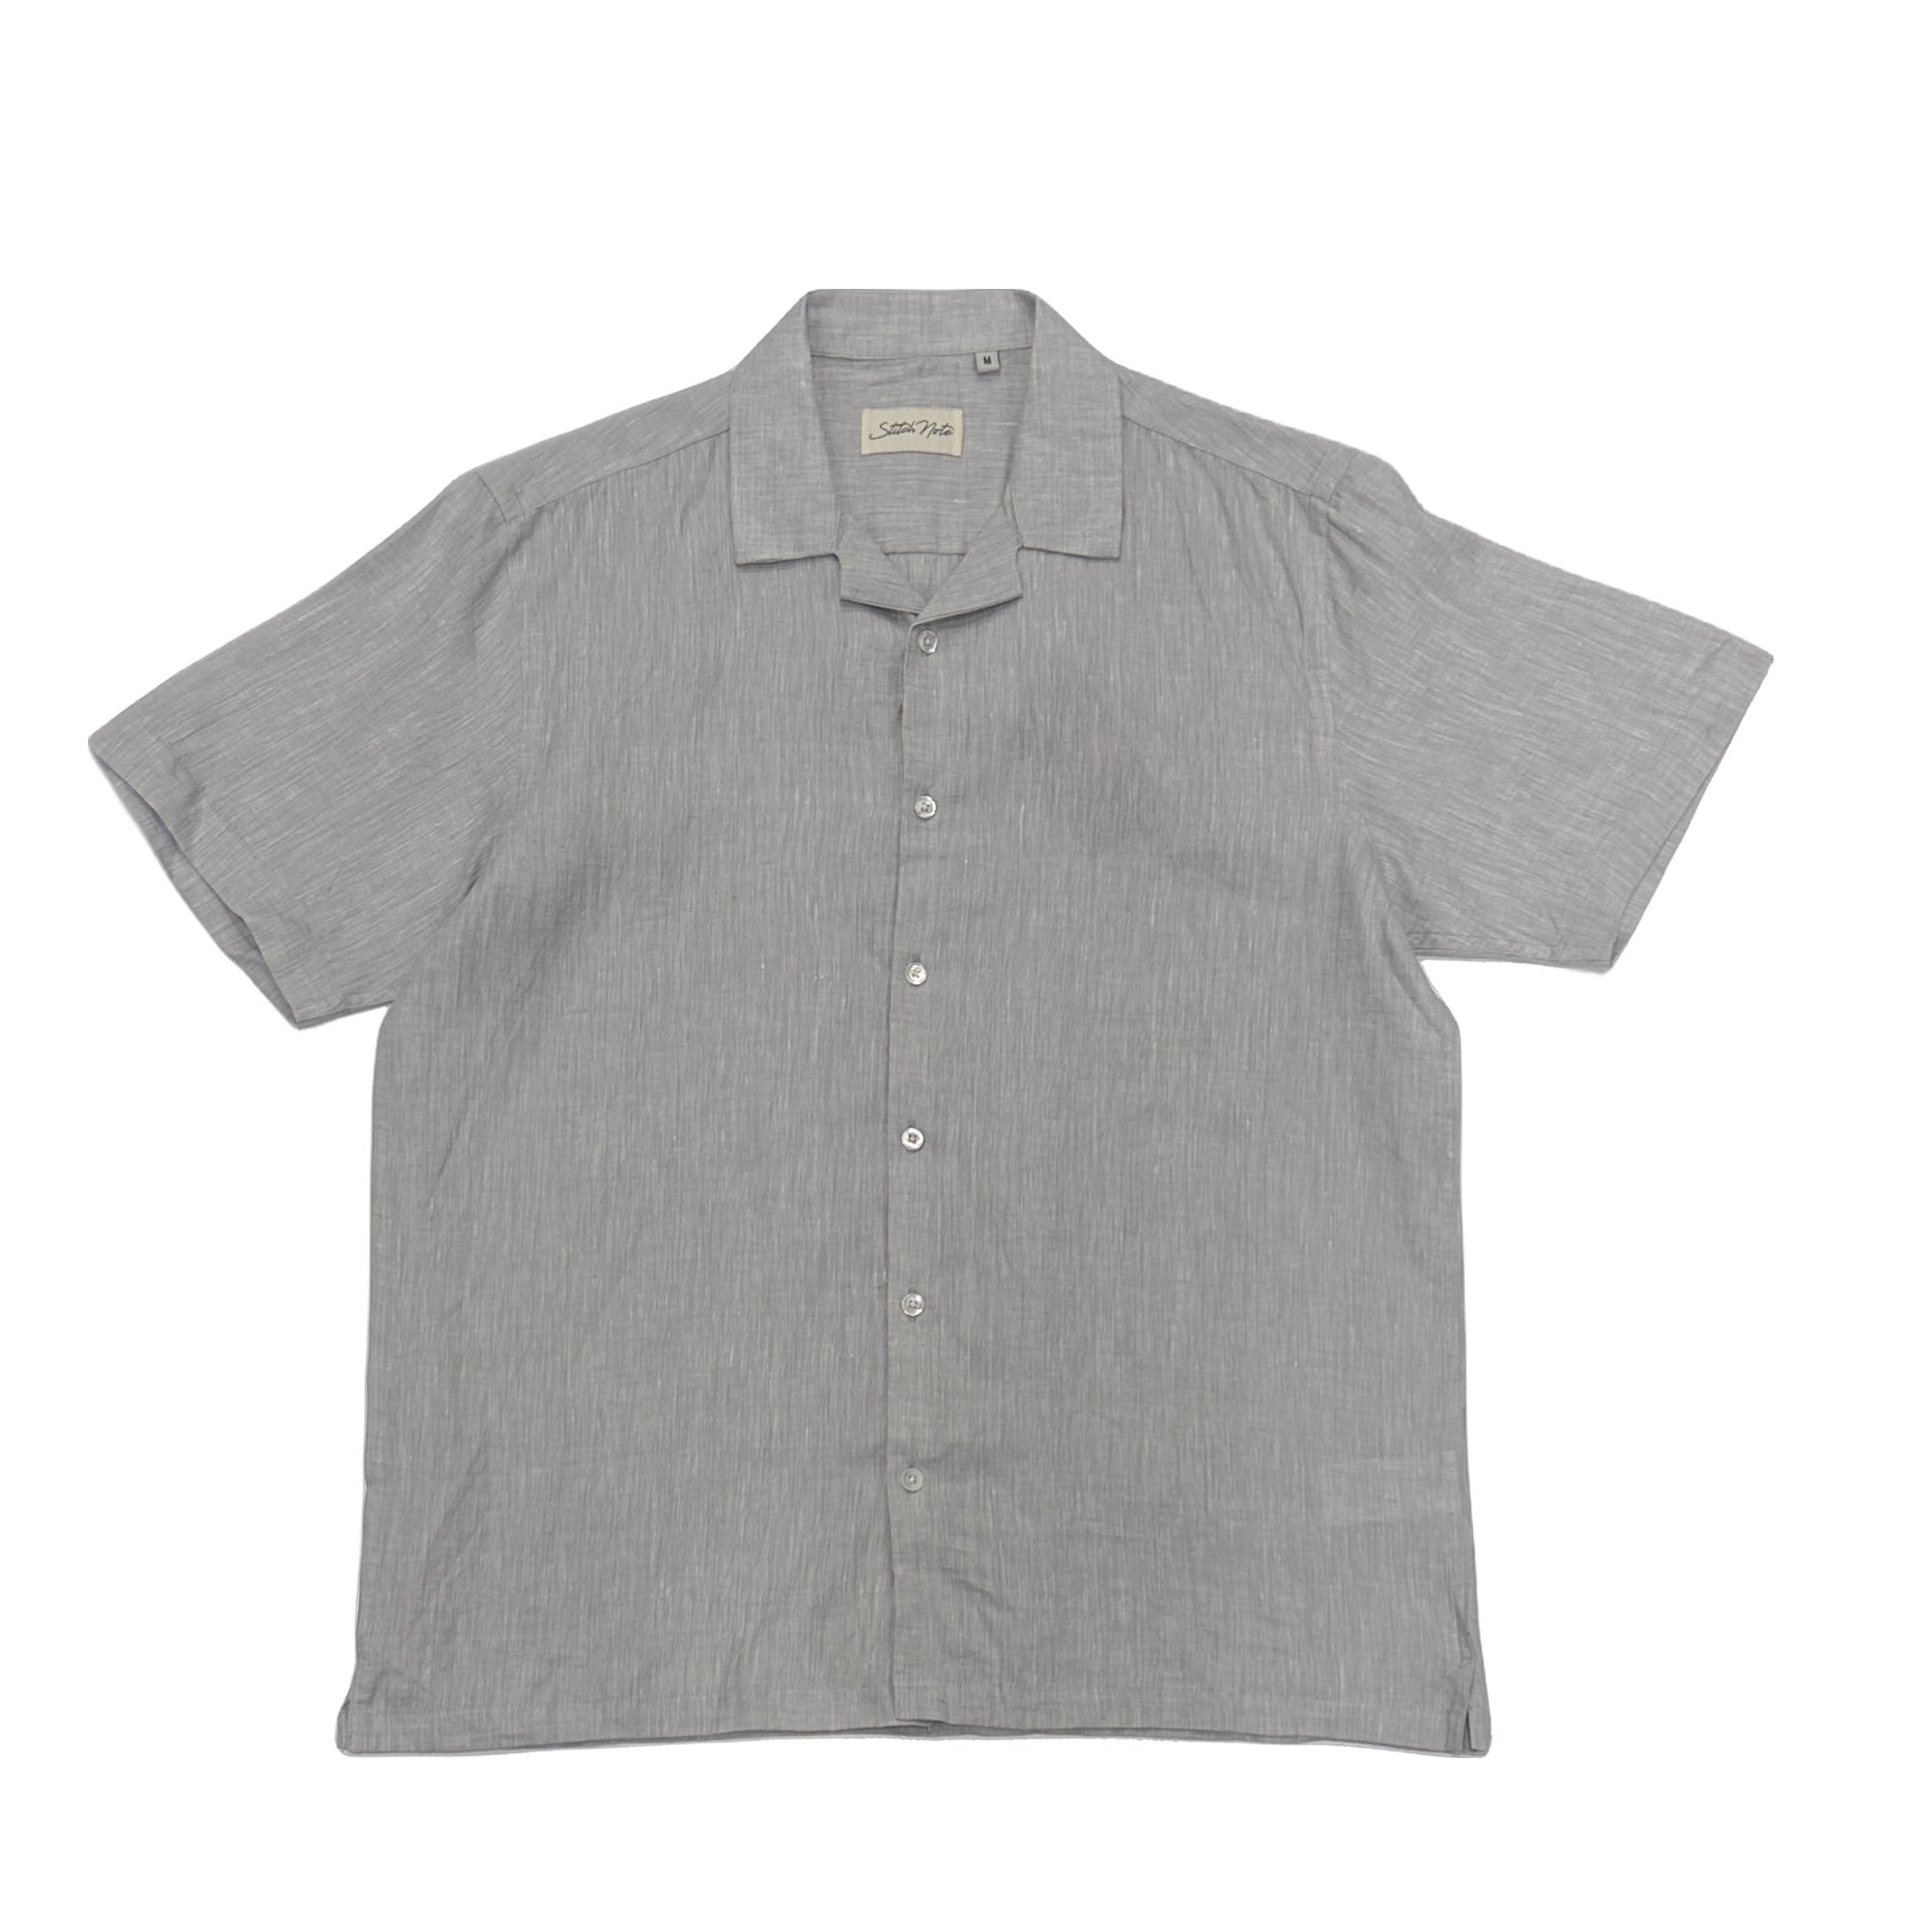 Stitch Note “The Lewis” Camp Collar Shirt (Light Grey) | Gents, Chaps ...